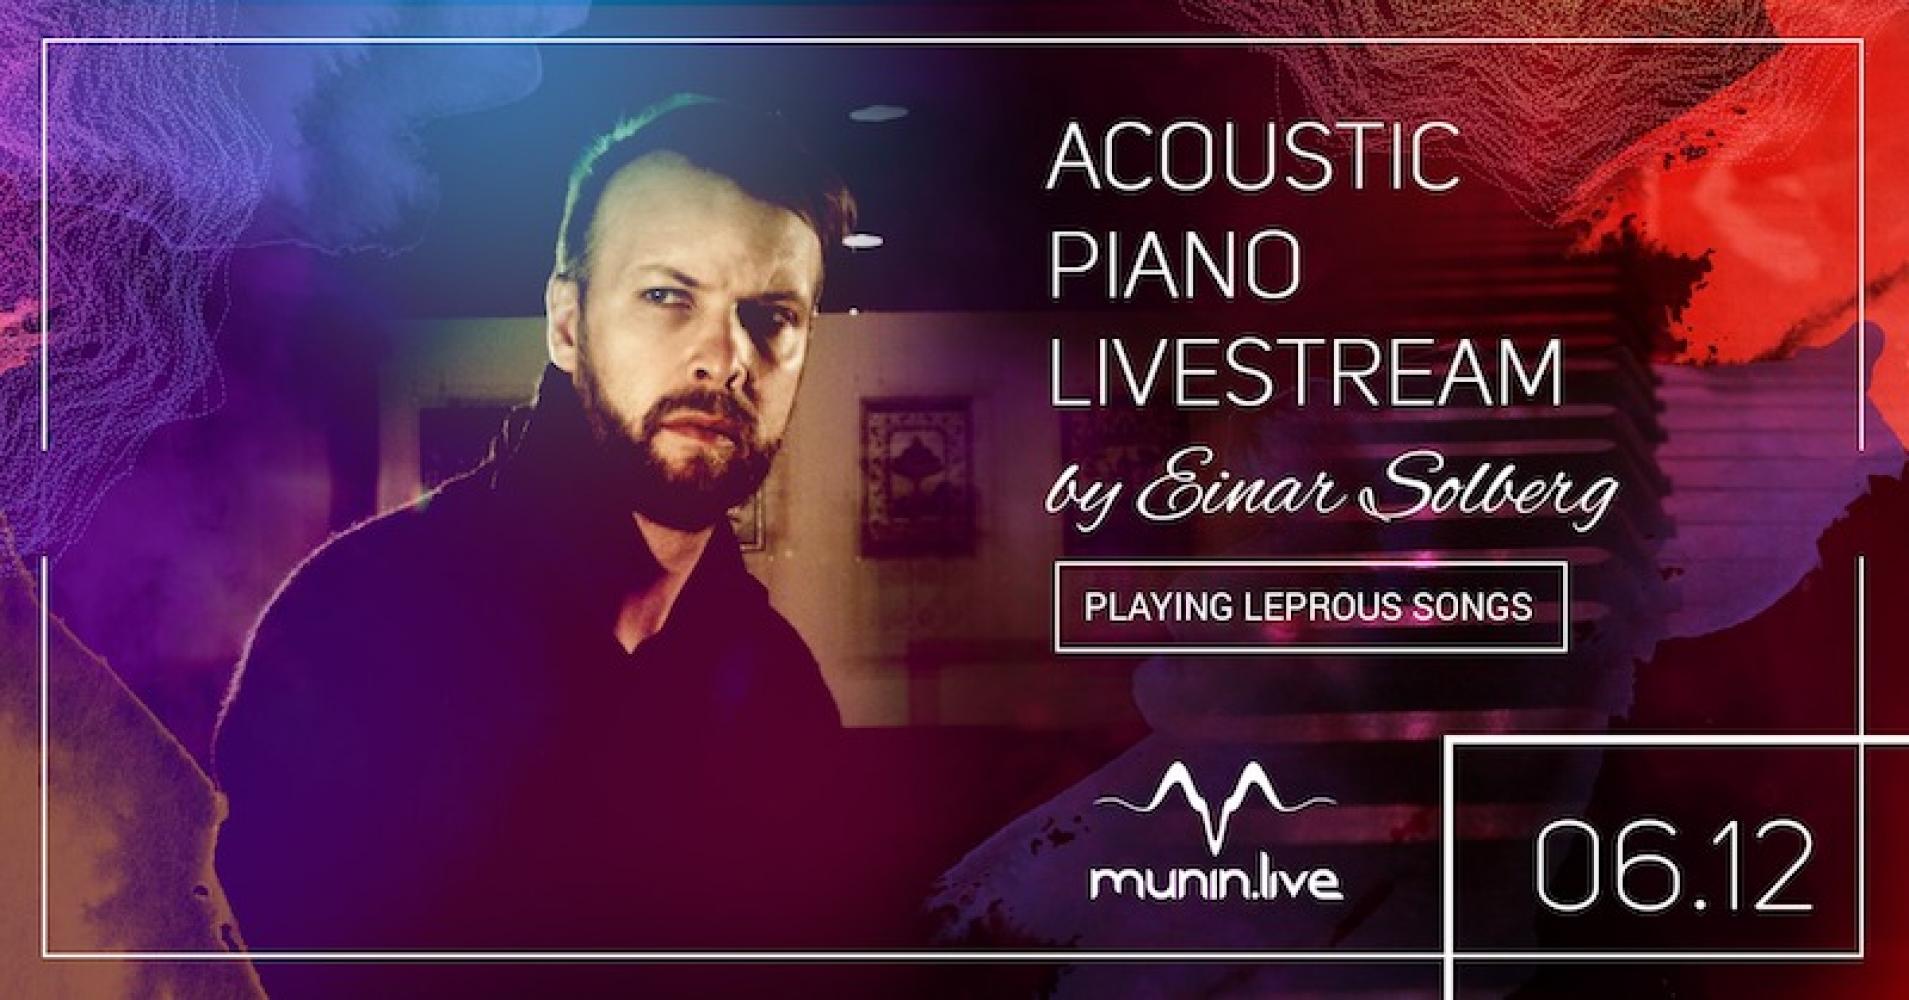 LEPROUS - Einar Solberg Acoustic Piano Live - 2020-12-06